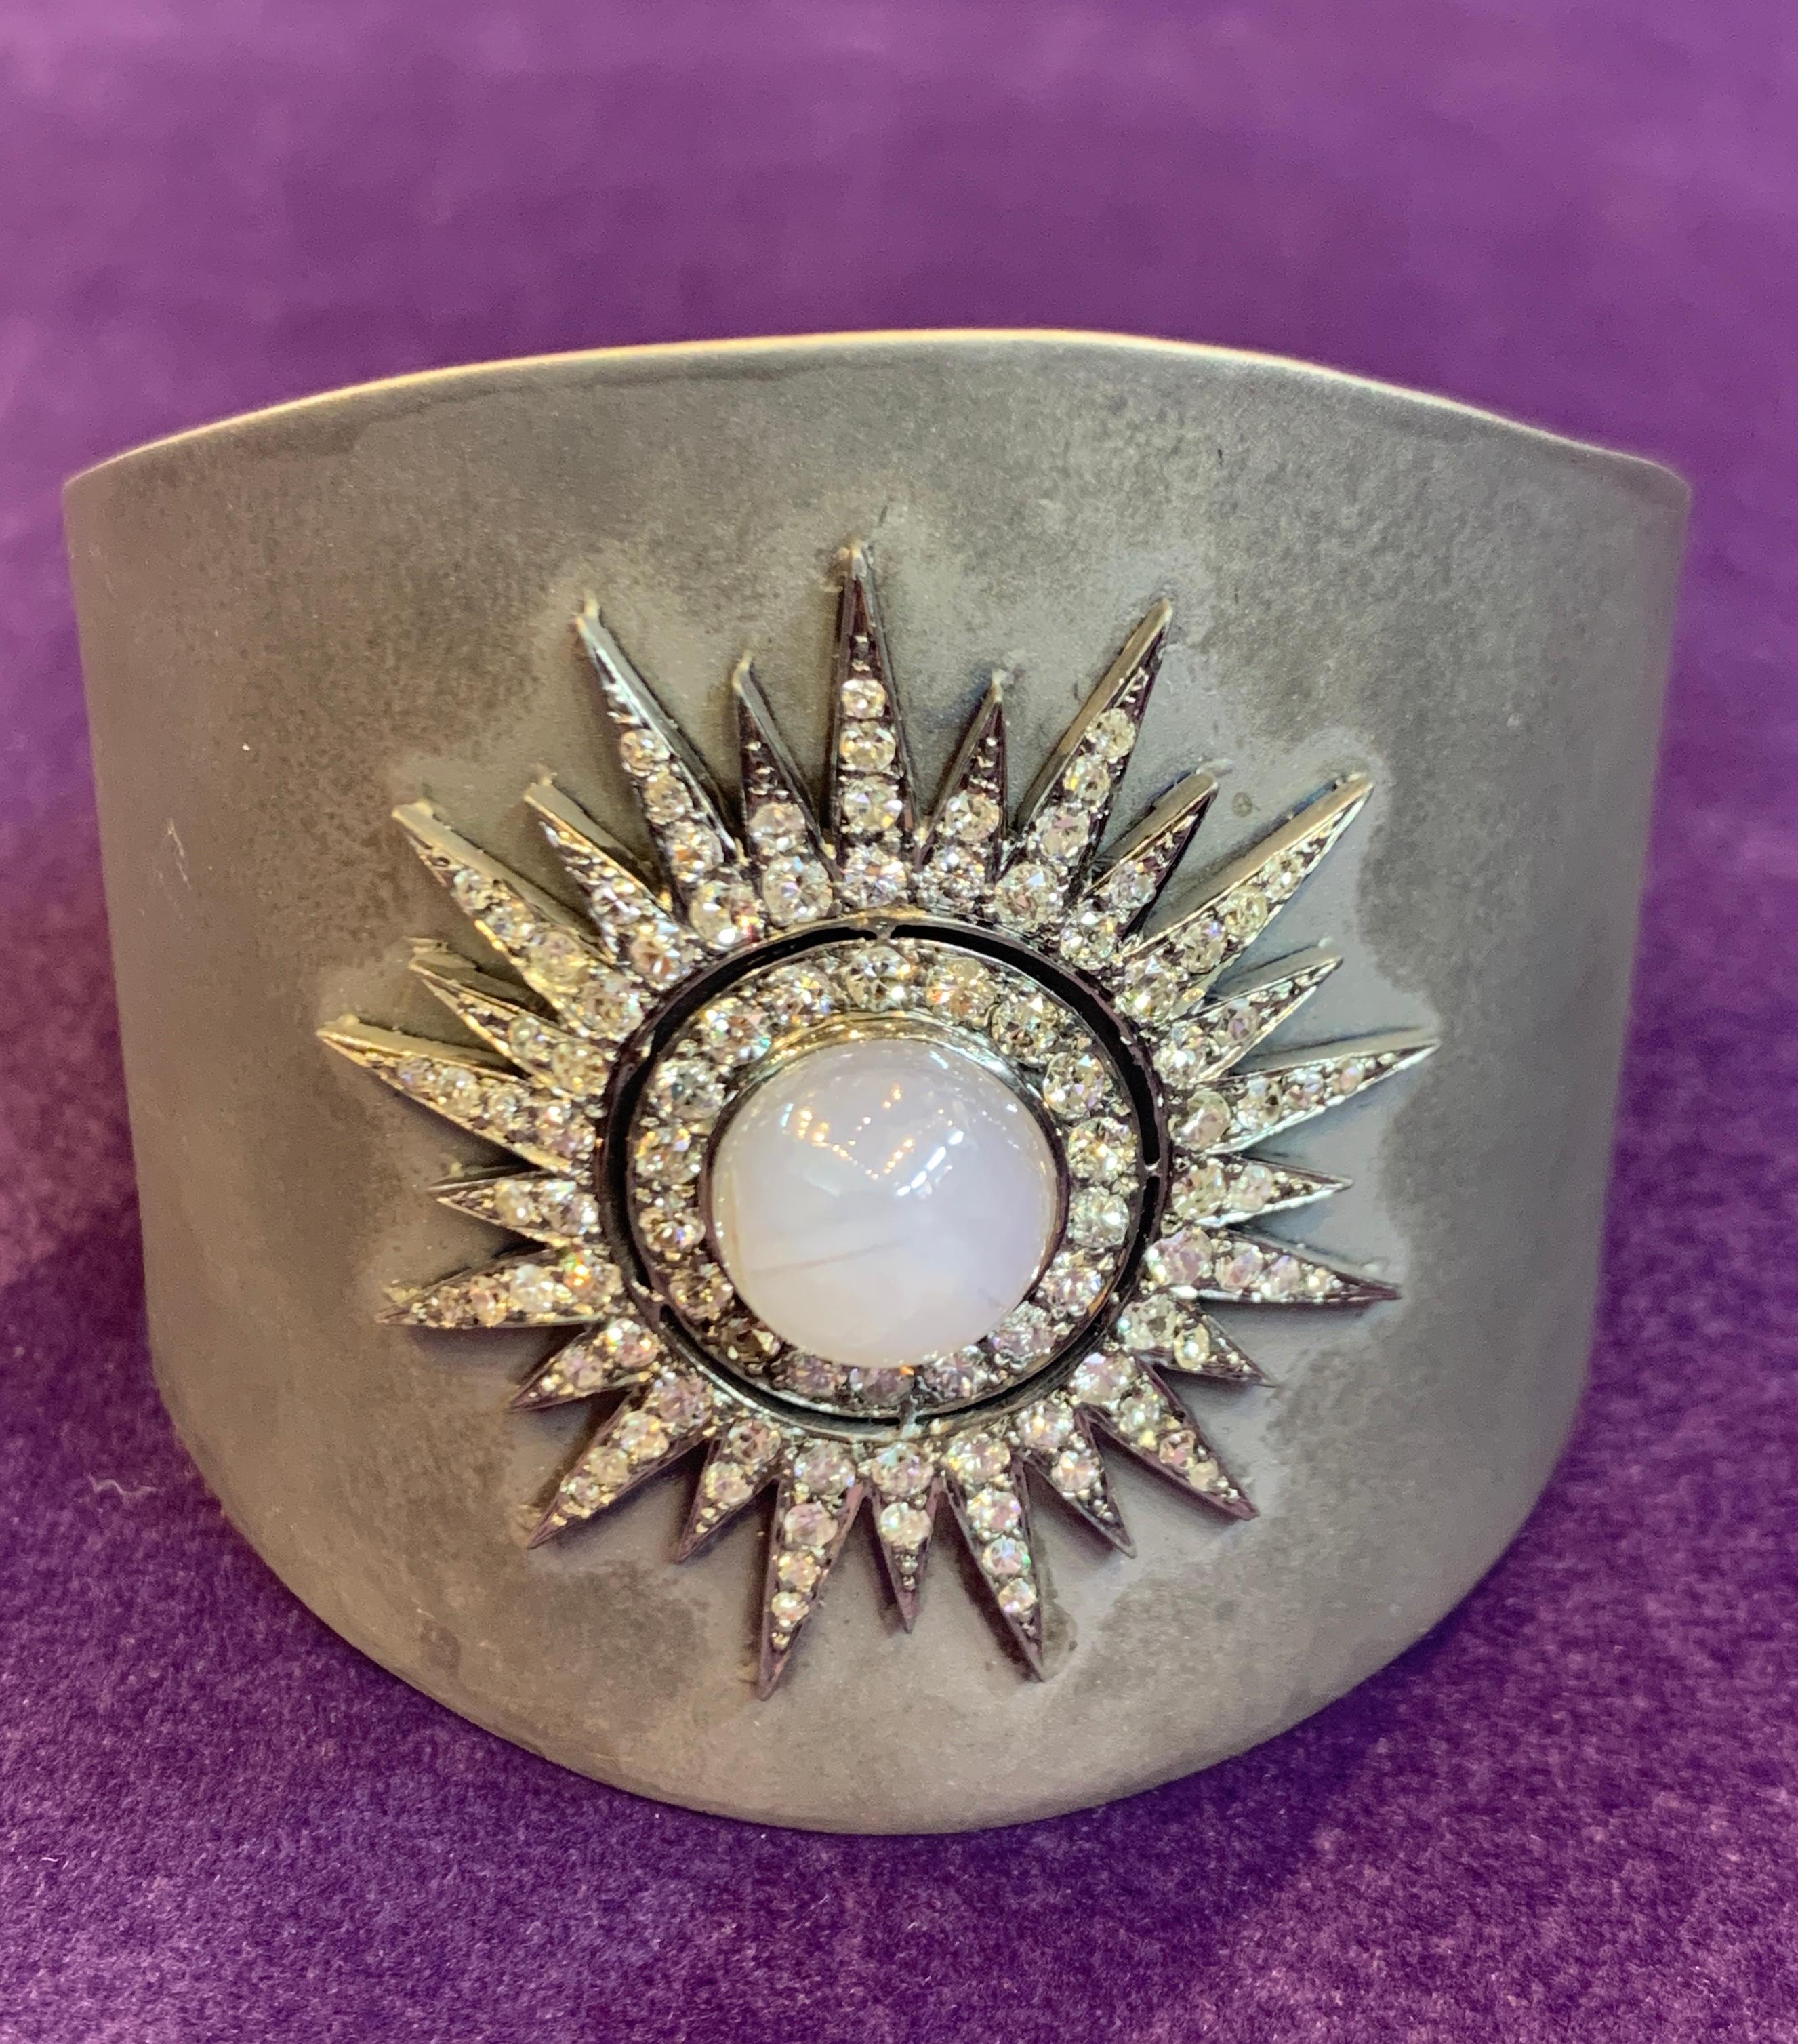 Silver & Gold Light Blue Cabochon Star Sapphire Bangle with 2.00 cts of diamonds and cabochon Victorian star brooch soldered on a modern gold & silver cuff
89.1 Grams
6.25 inches in diameter
2 inches wide 
